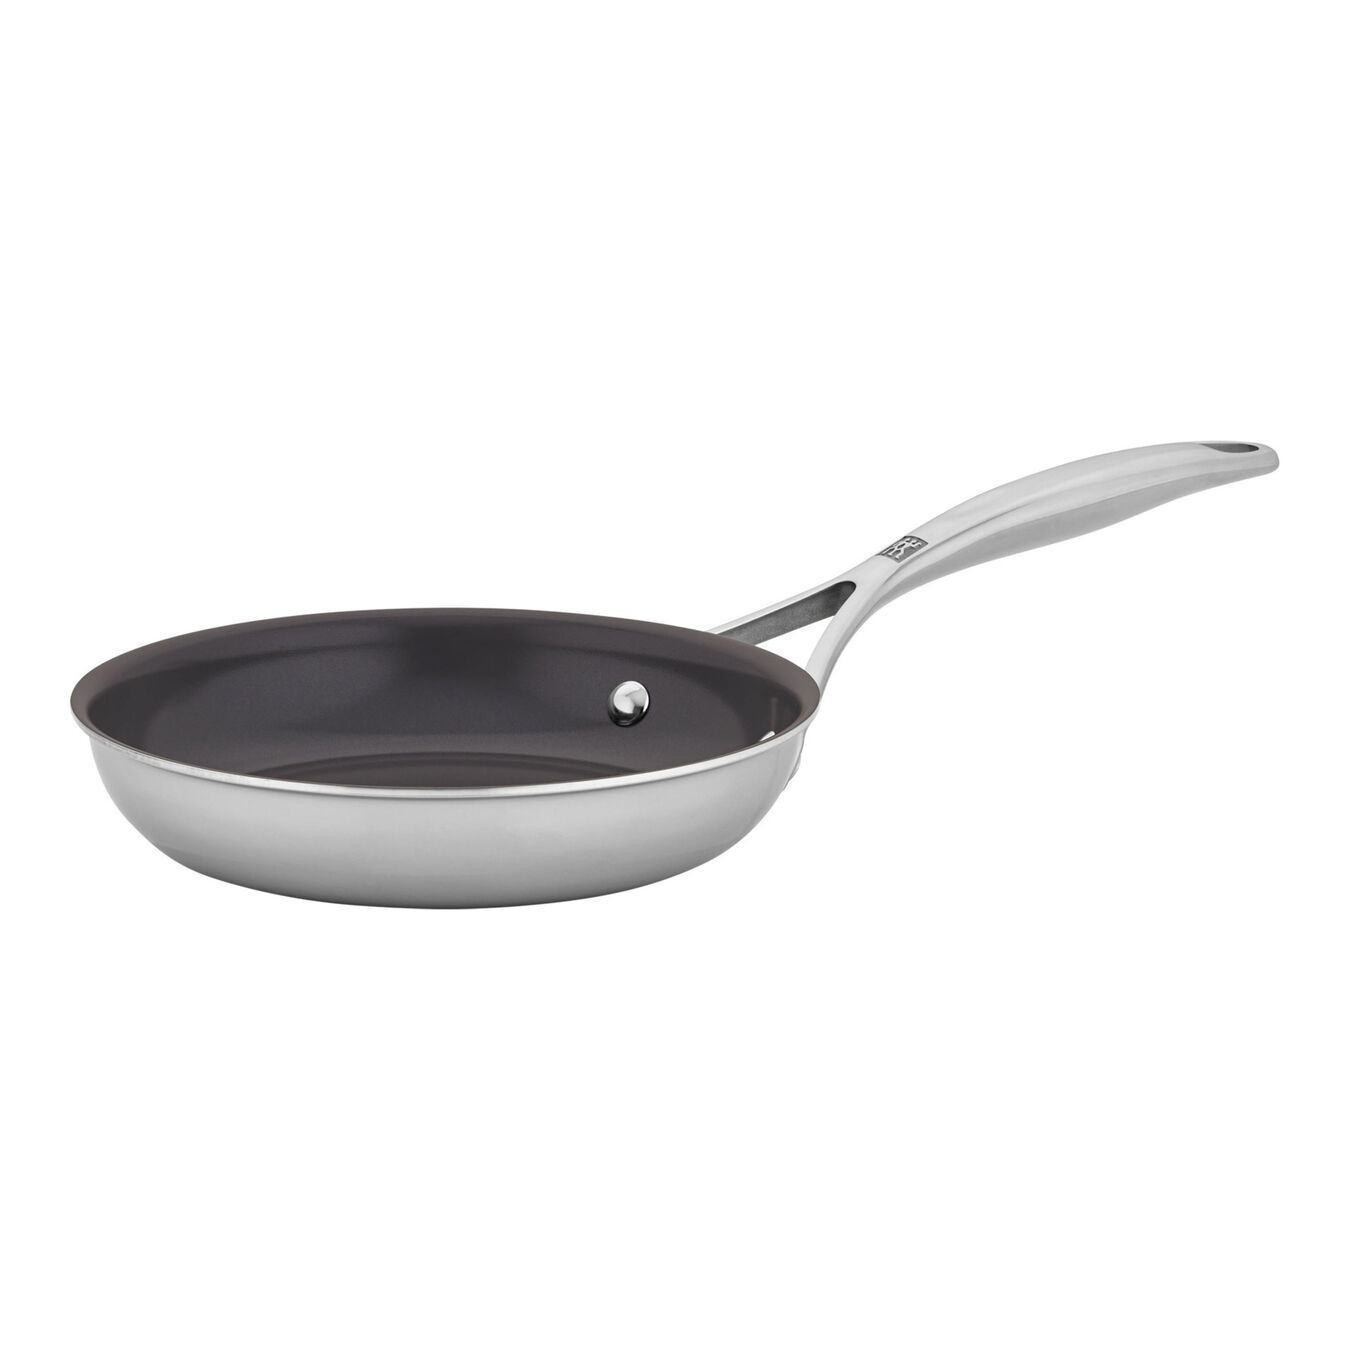 30 cm / 12 inch 18/10 Stainless Steel Ceramic Non-Stick Frypan,,large 1